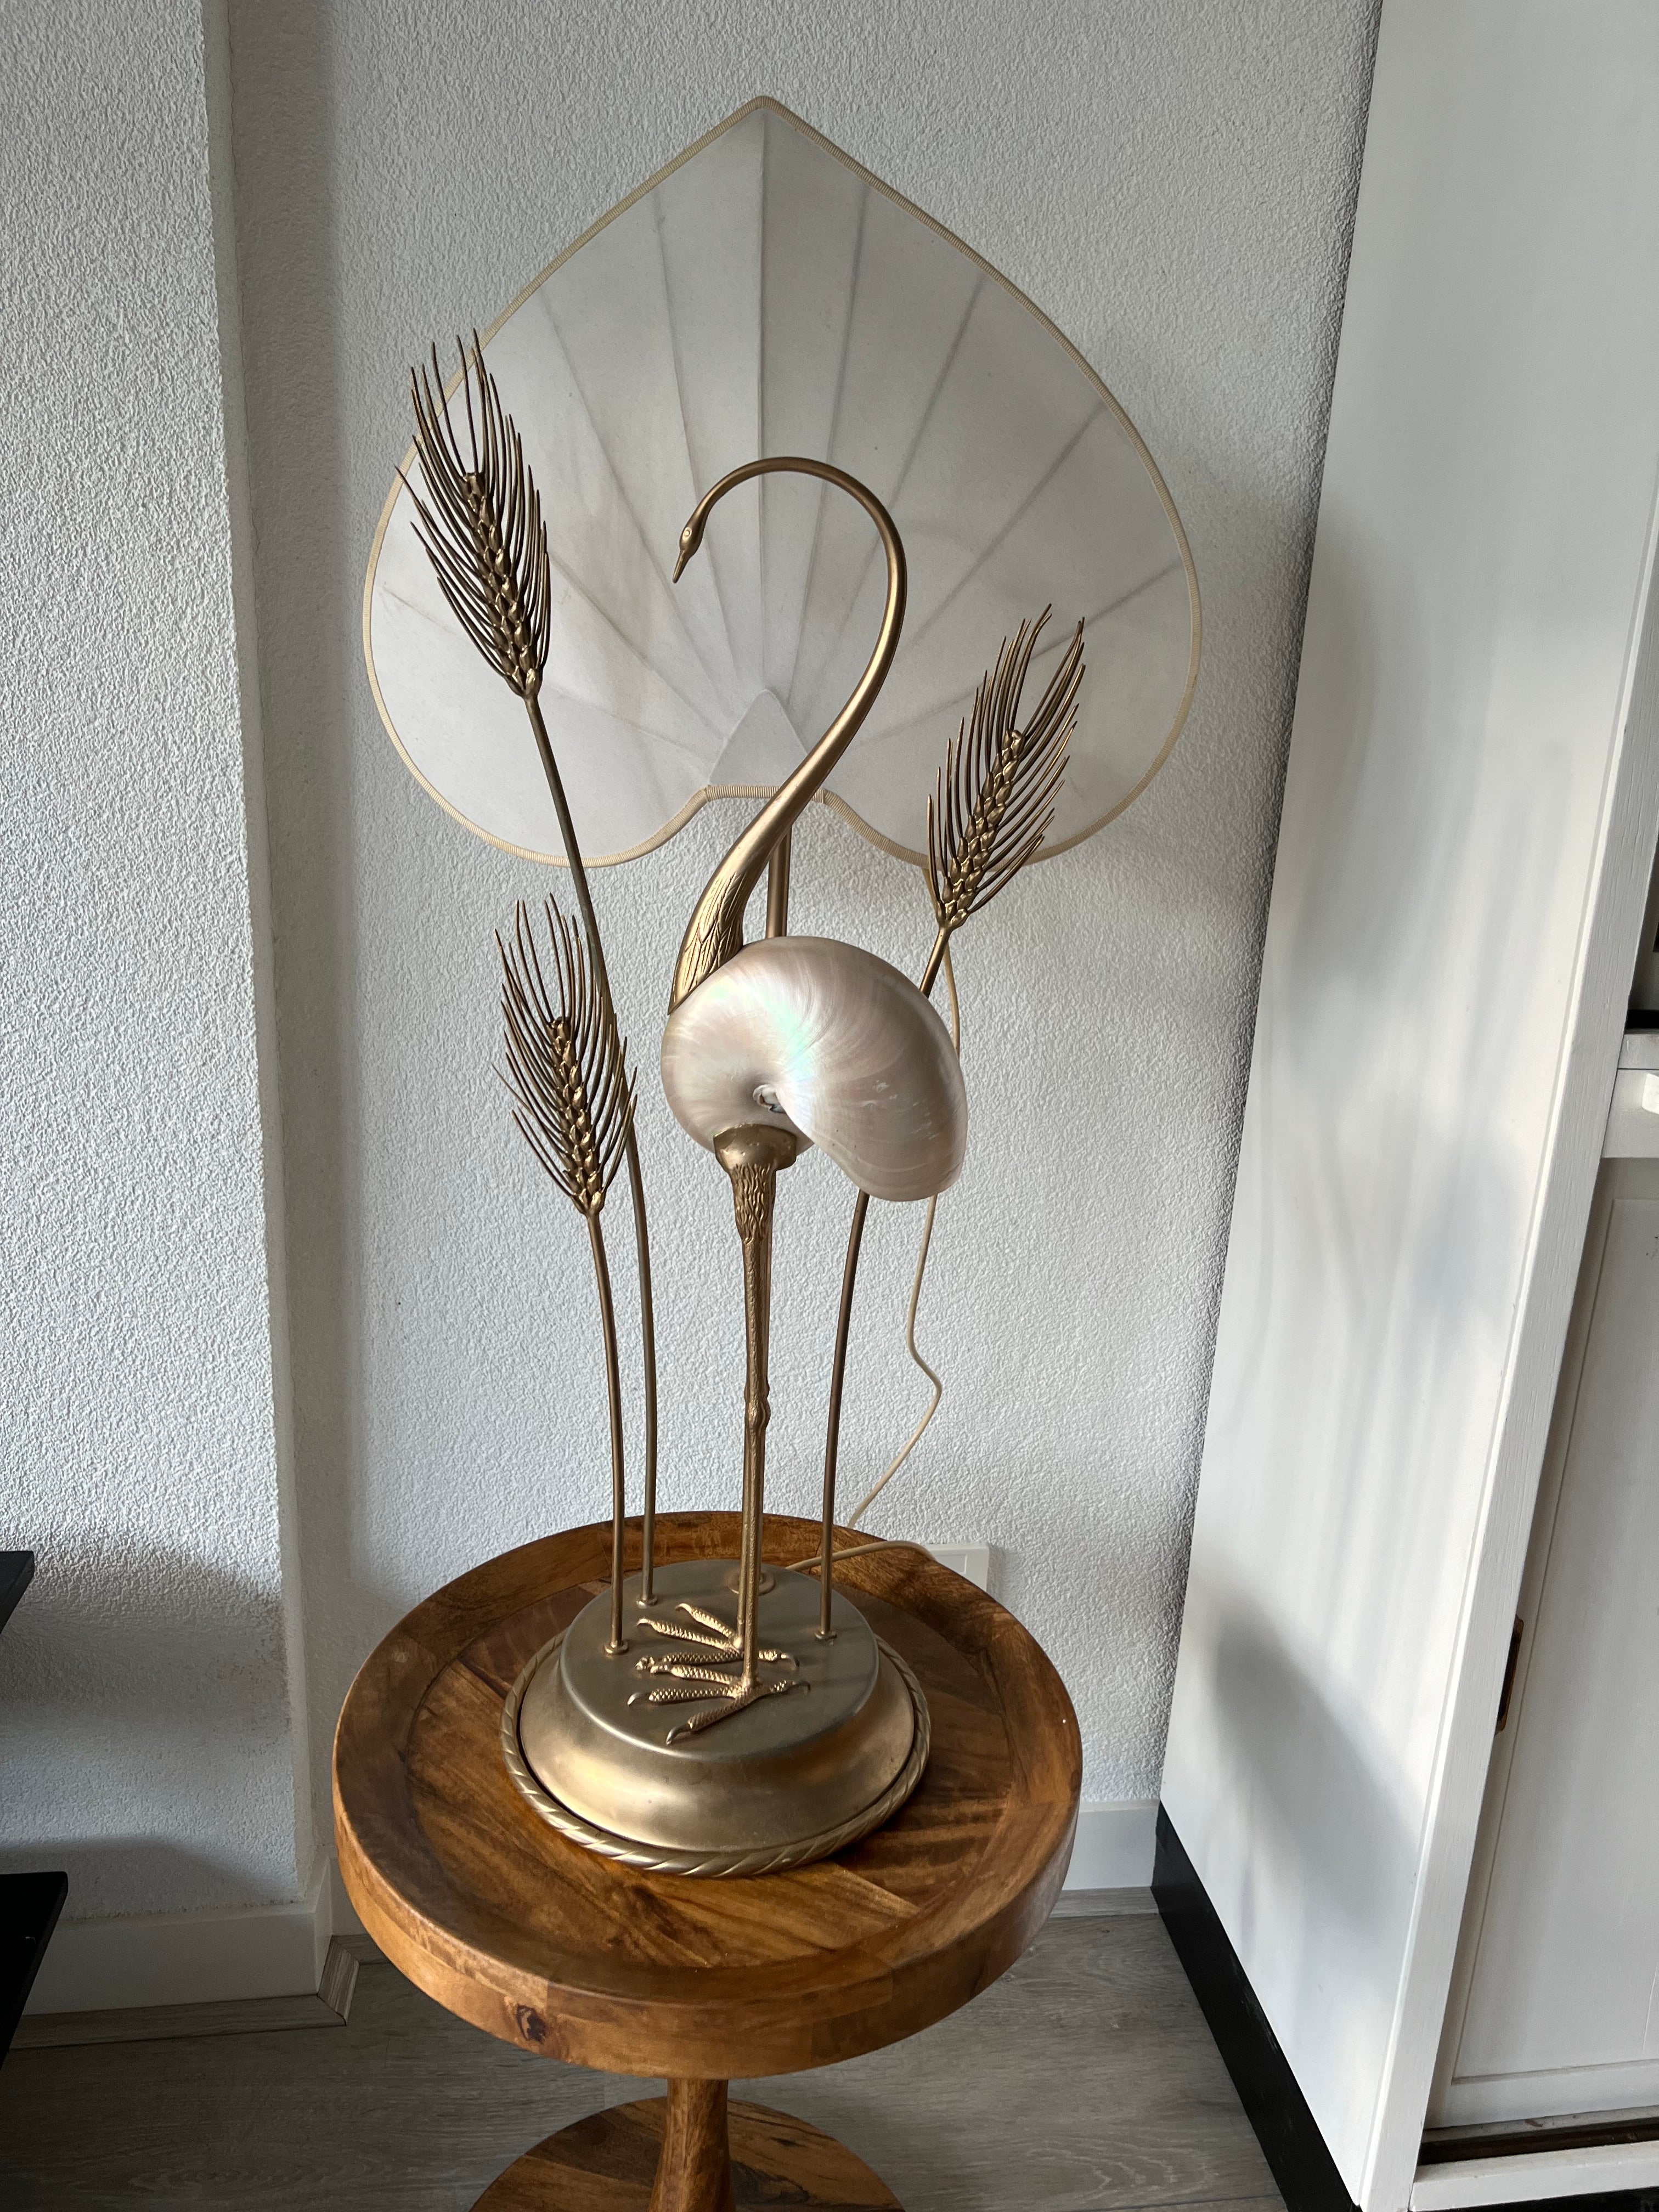 Outstanding sculptural bird lamp table by Antonio Pavia, Italian designer.

This incredibly well designed and perfectly executed table lamp by Antonio Pavia of Italy has great decorative value. This rare lamp with the large and long legged wading